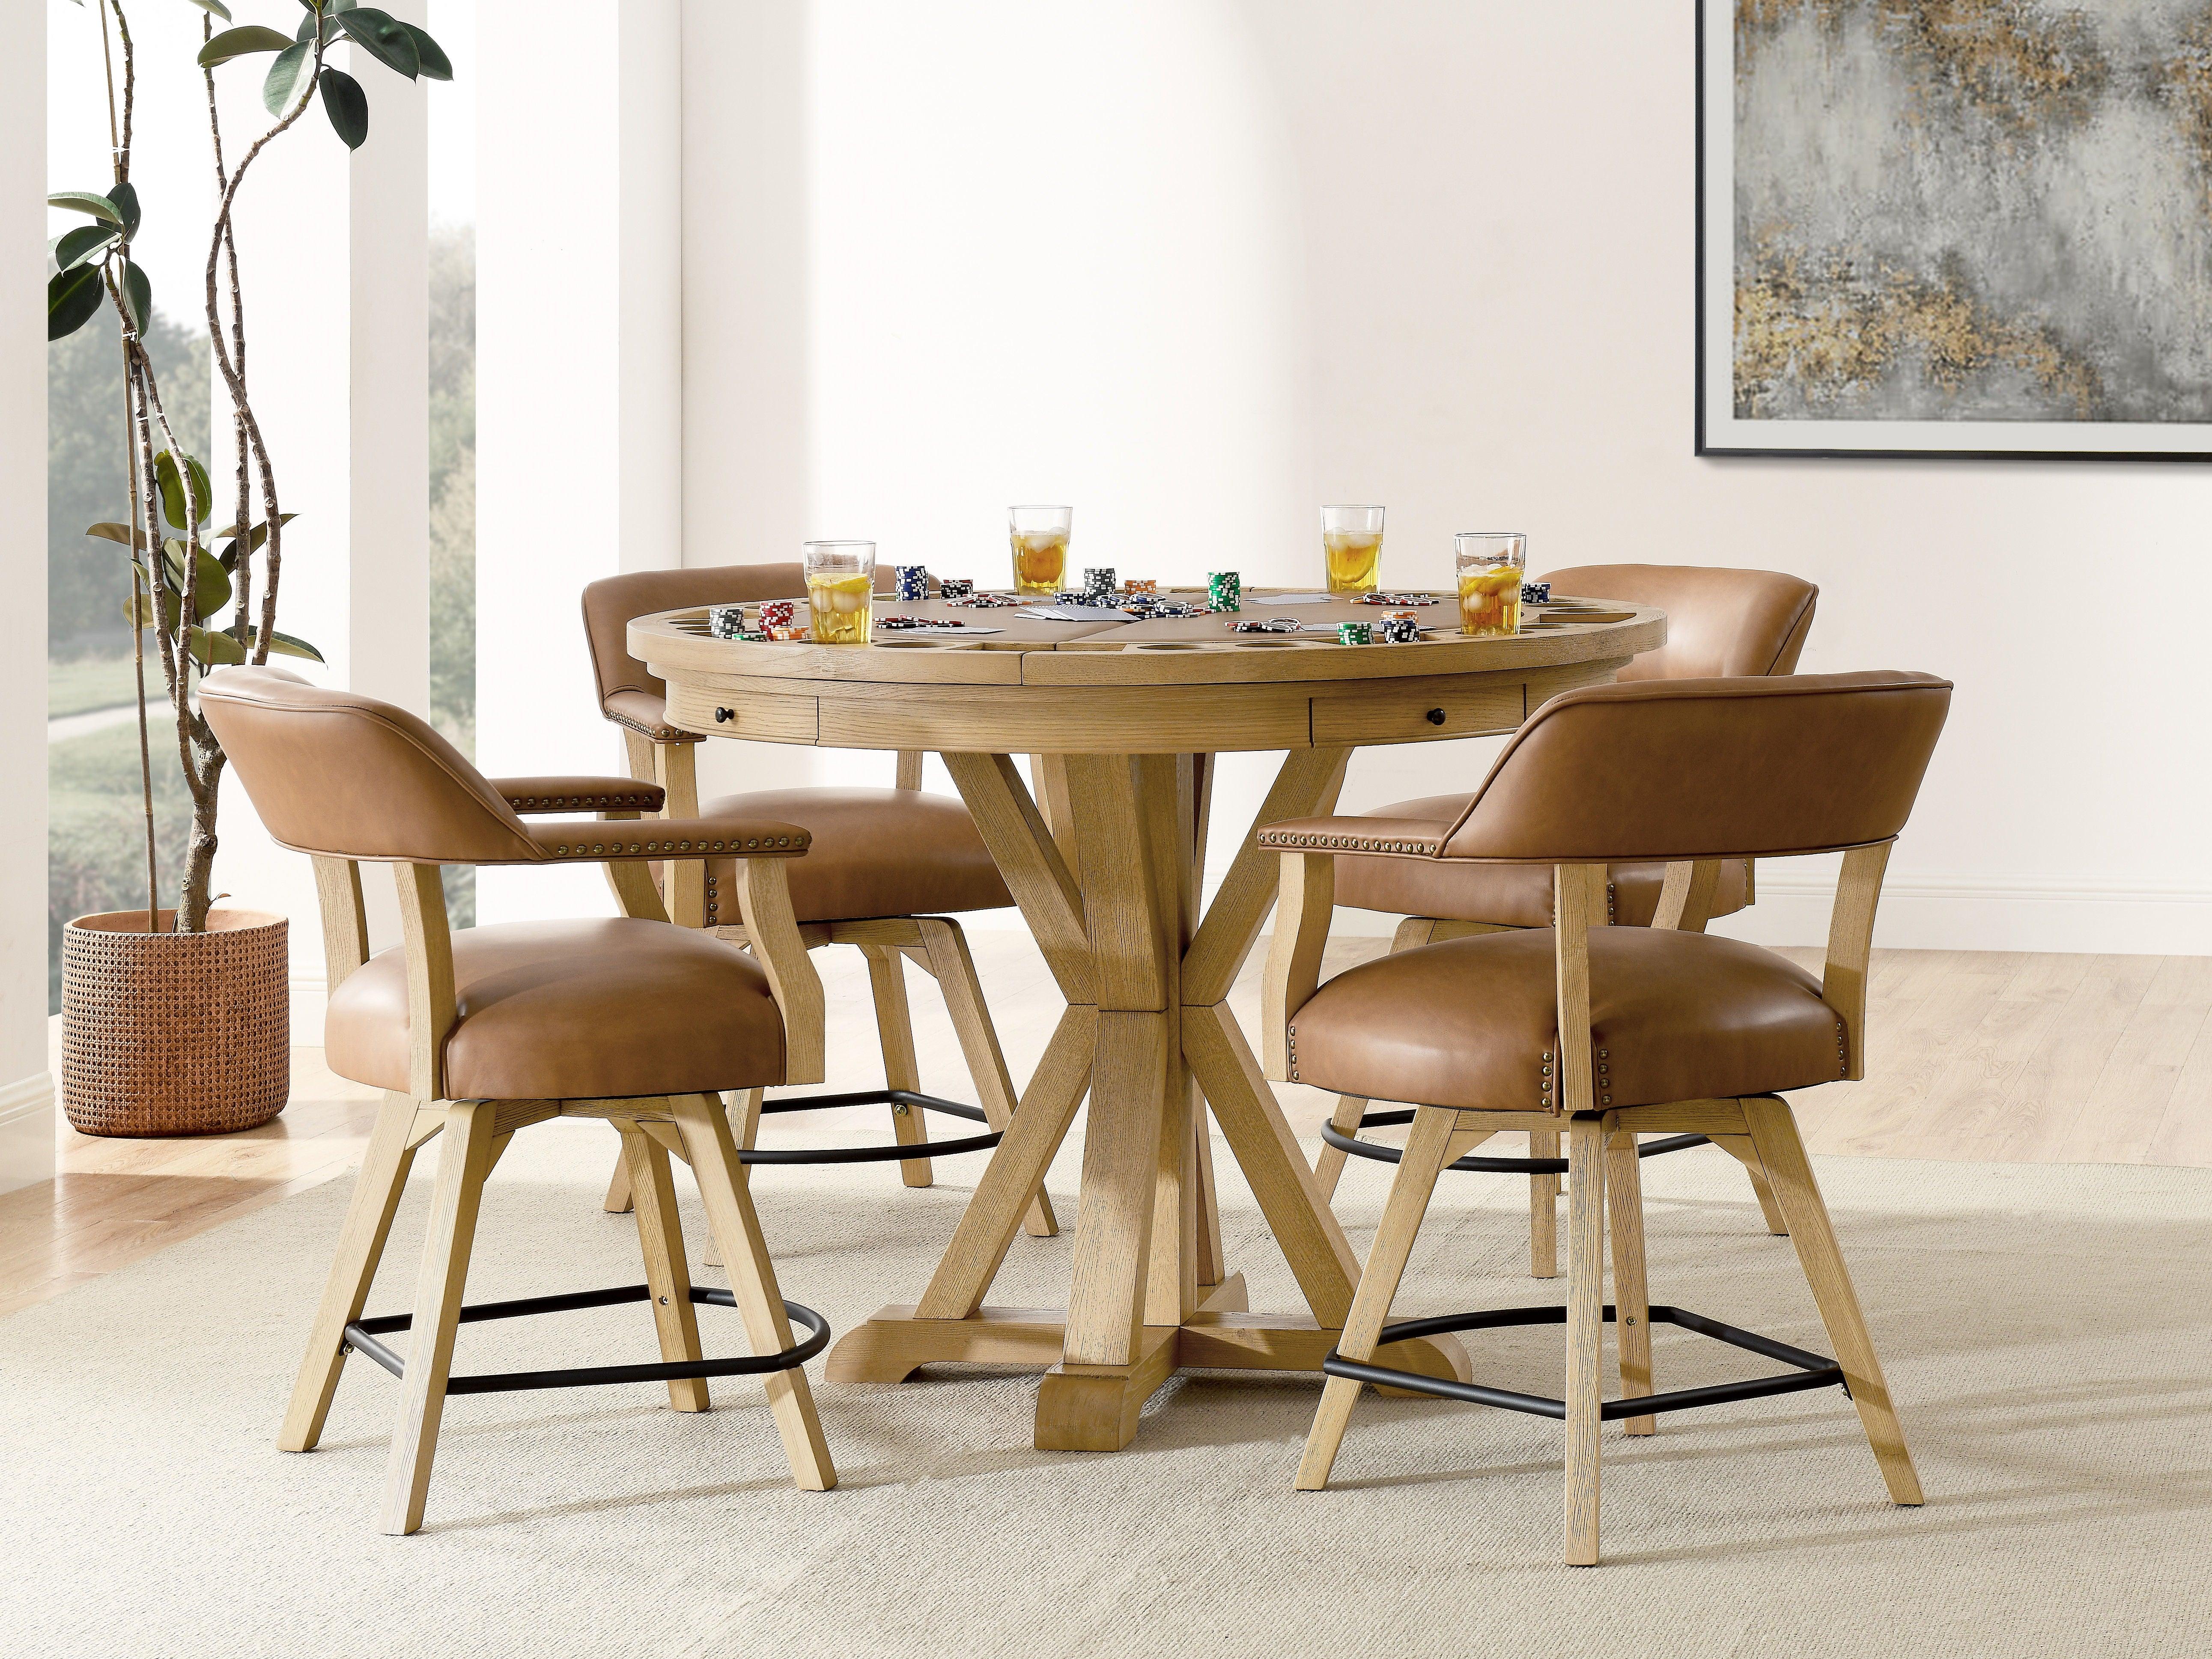 Steve Silver Furniture - Rylie - 6 Piece Dining Set (Game Top Counter Table & 4 Counter Chairs) - Sand / Brown - 5th Avenue Furniture